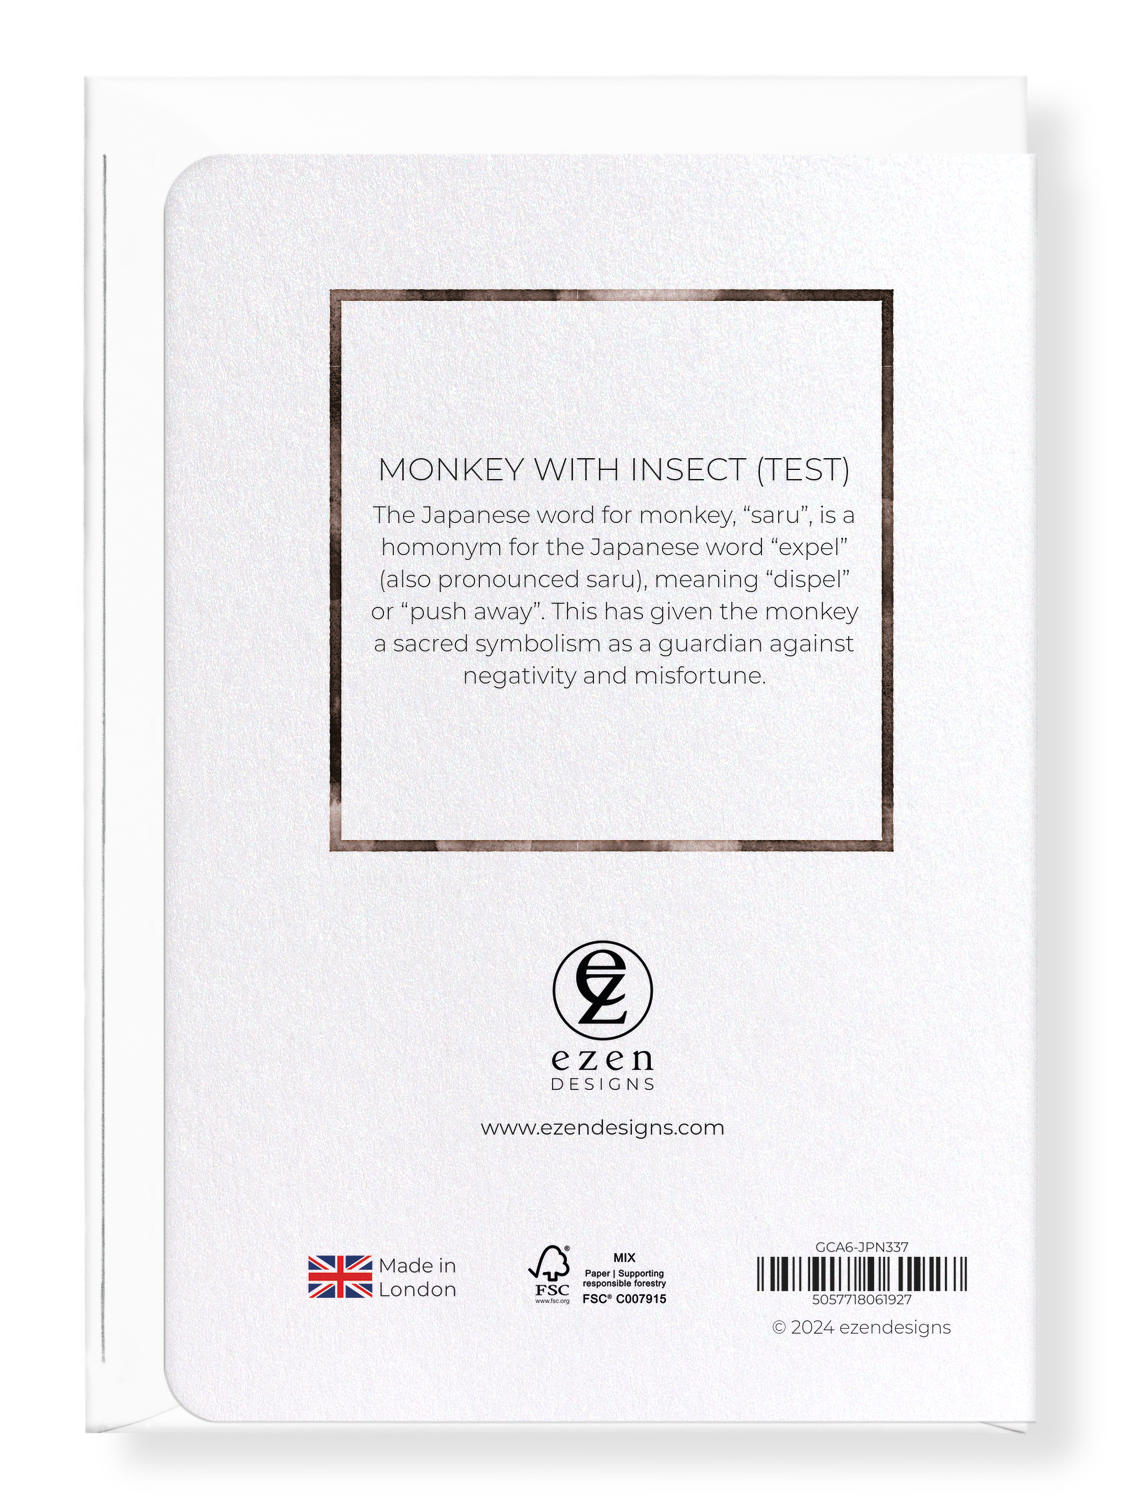 Ezen Designs - Monkey with insect (TEST) - Greeting Card - Back